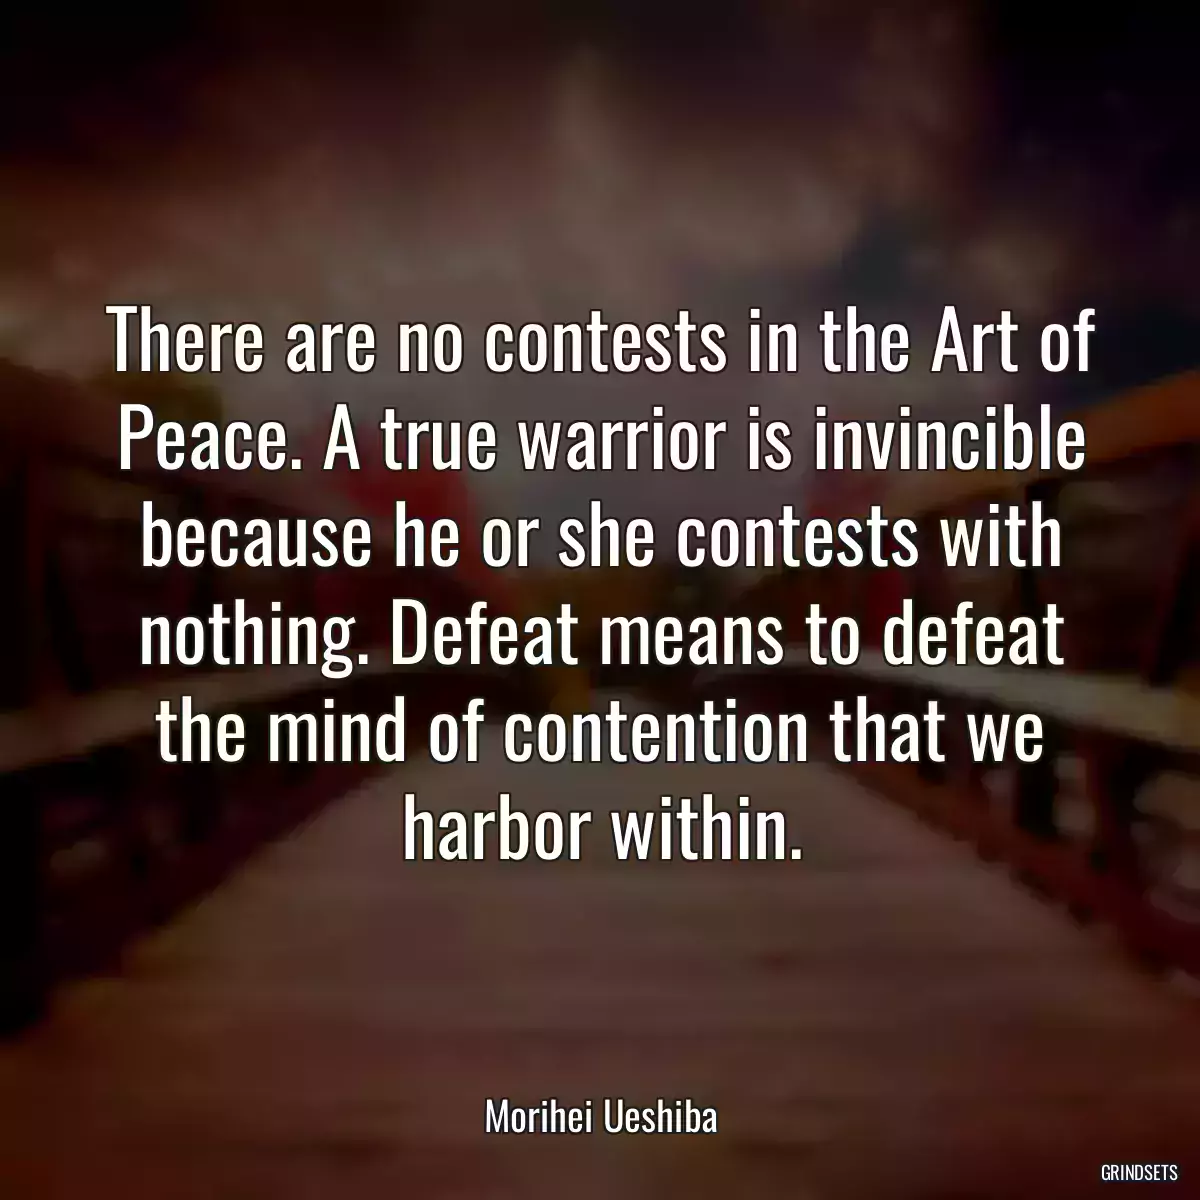 There are no contests in the Art of Peace. A true warrior is invincible because he or she contests with nothing. Defeat means to defeat the mind of contention that we harbor within.